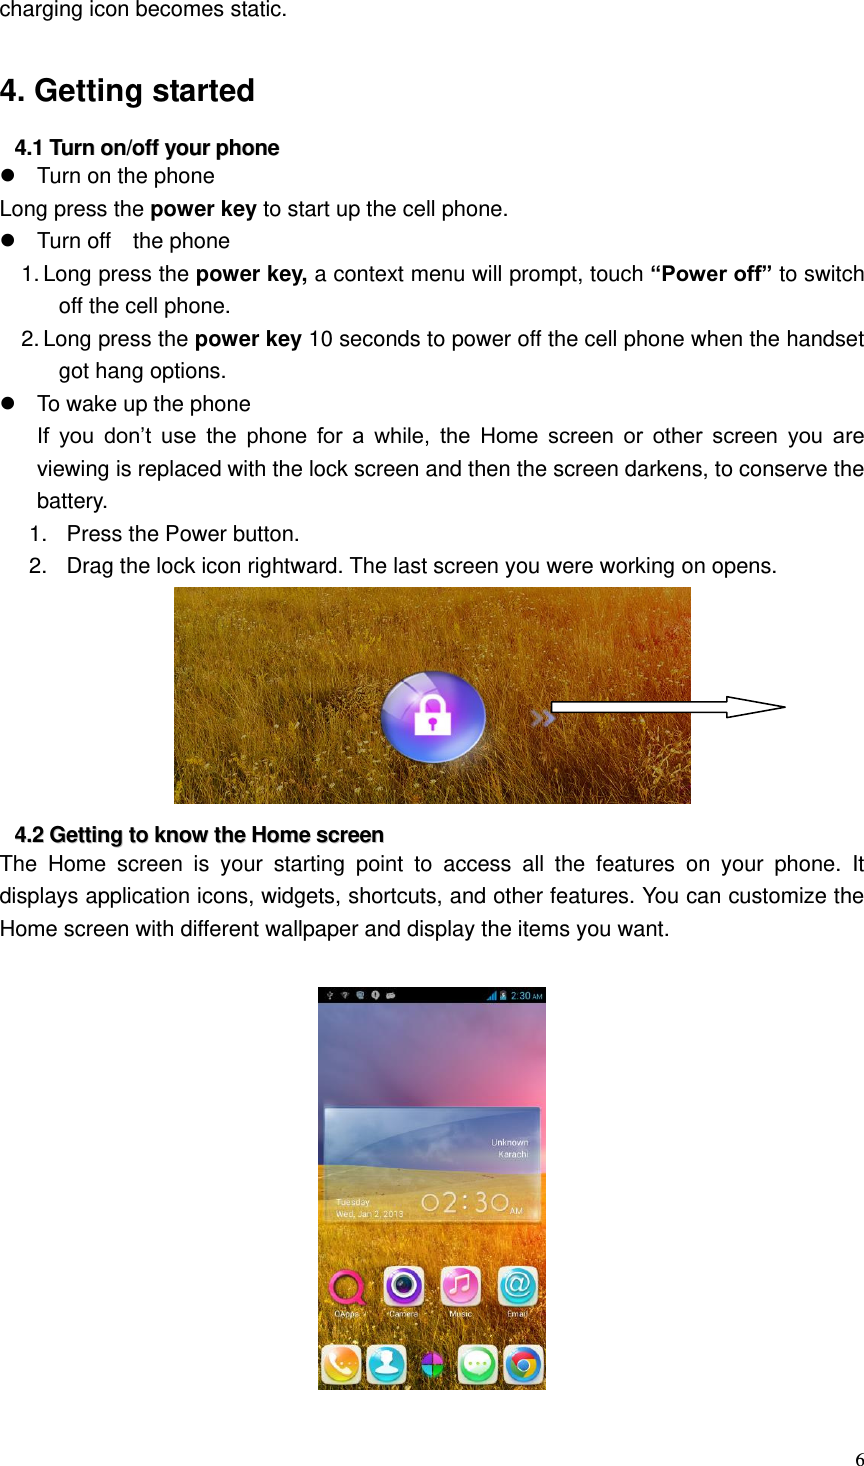  6  charging icon becomes static.  4. Getting started 44..11  TTuurrnn  oonn//ooffff  yyoouurr  pphhoonnee    Turn on the phone Long press the power key to start up the cell phone.   Turn off    the phone 1. Long press the power key, a context menu will prompt, touch “Power off” to switch off the cell phone. 2. Long press the power key 10 seconds to power off the cell phone when the handset got hang options.   To wake up the phone If  you  don’t  use  the  phone  for  a  while,  the  Home  screen  or  other  screen  you  are viewing is replaced with the lock screen and then the screen darkens, to conserve the battery. 1.  Press the Power button.   2.  Drag the lock icon rightward. The last screen you were working on opens.  44..22  GGeettttiinngg  ttoo  kknnooww  tthhee  HHoommee  ssccrreeeenn  The  Home  screen  is  your  starting  point  to  access  all  the  features  on  your  phone.  It displays application icons, widgets, shortcuts, and other features. You can customize the Home screen with different wallpaper and display the items you want.      